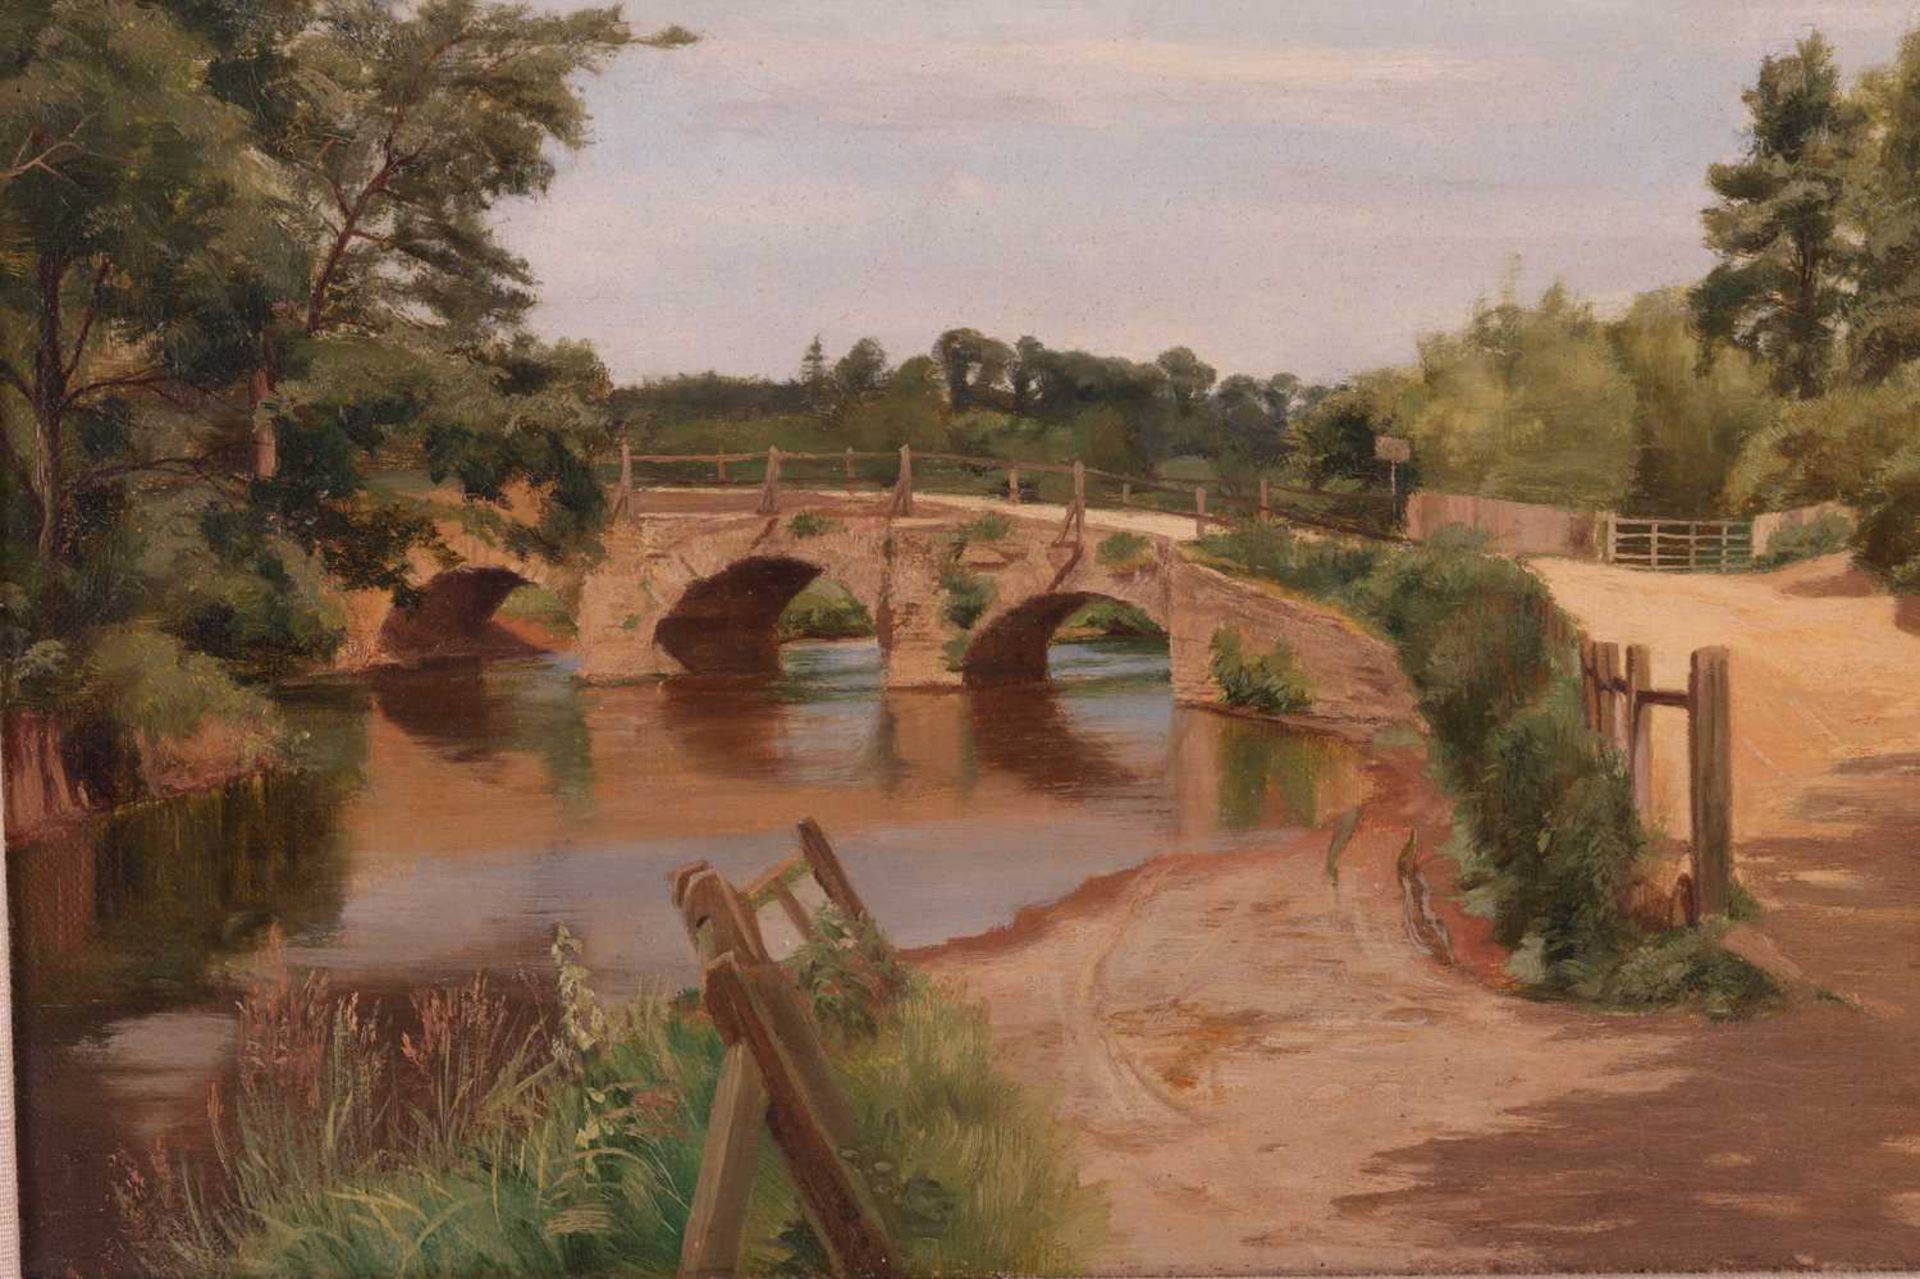 Charles Low (1840 - 1906), The Village Ford, Eashing, Surrey, signed, oil on canvas, 32.5 x 49 cm, f - Image 4 of 8